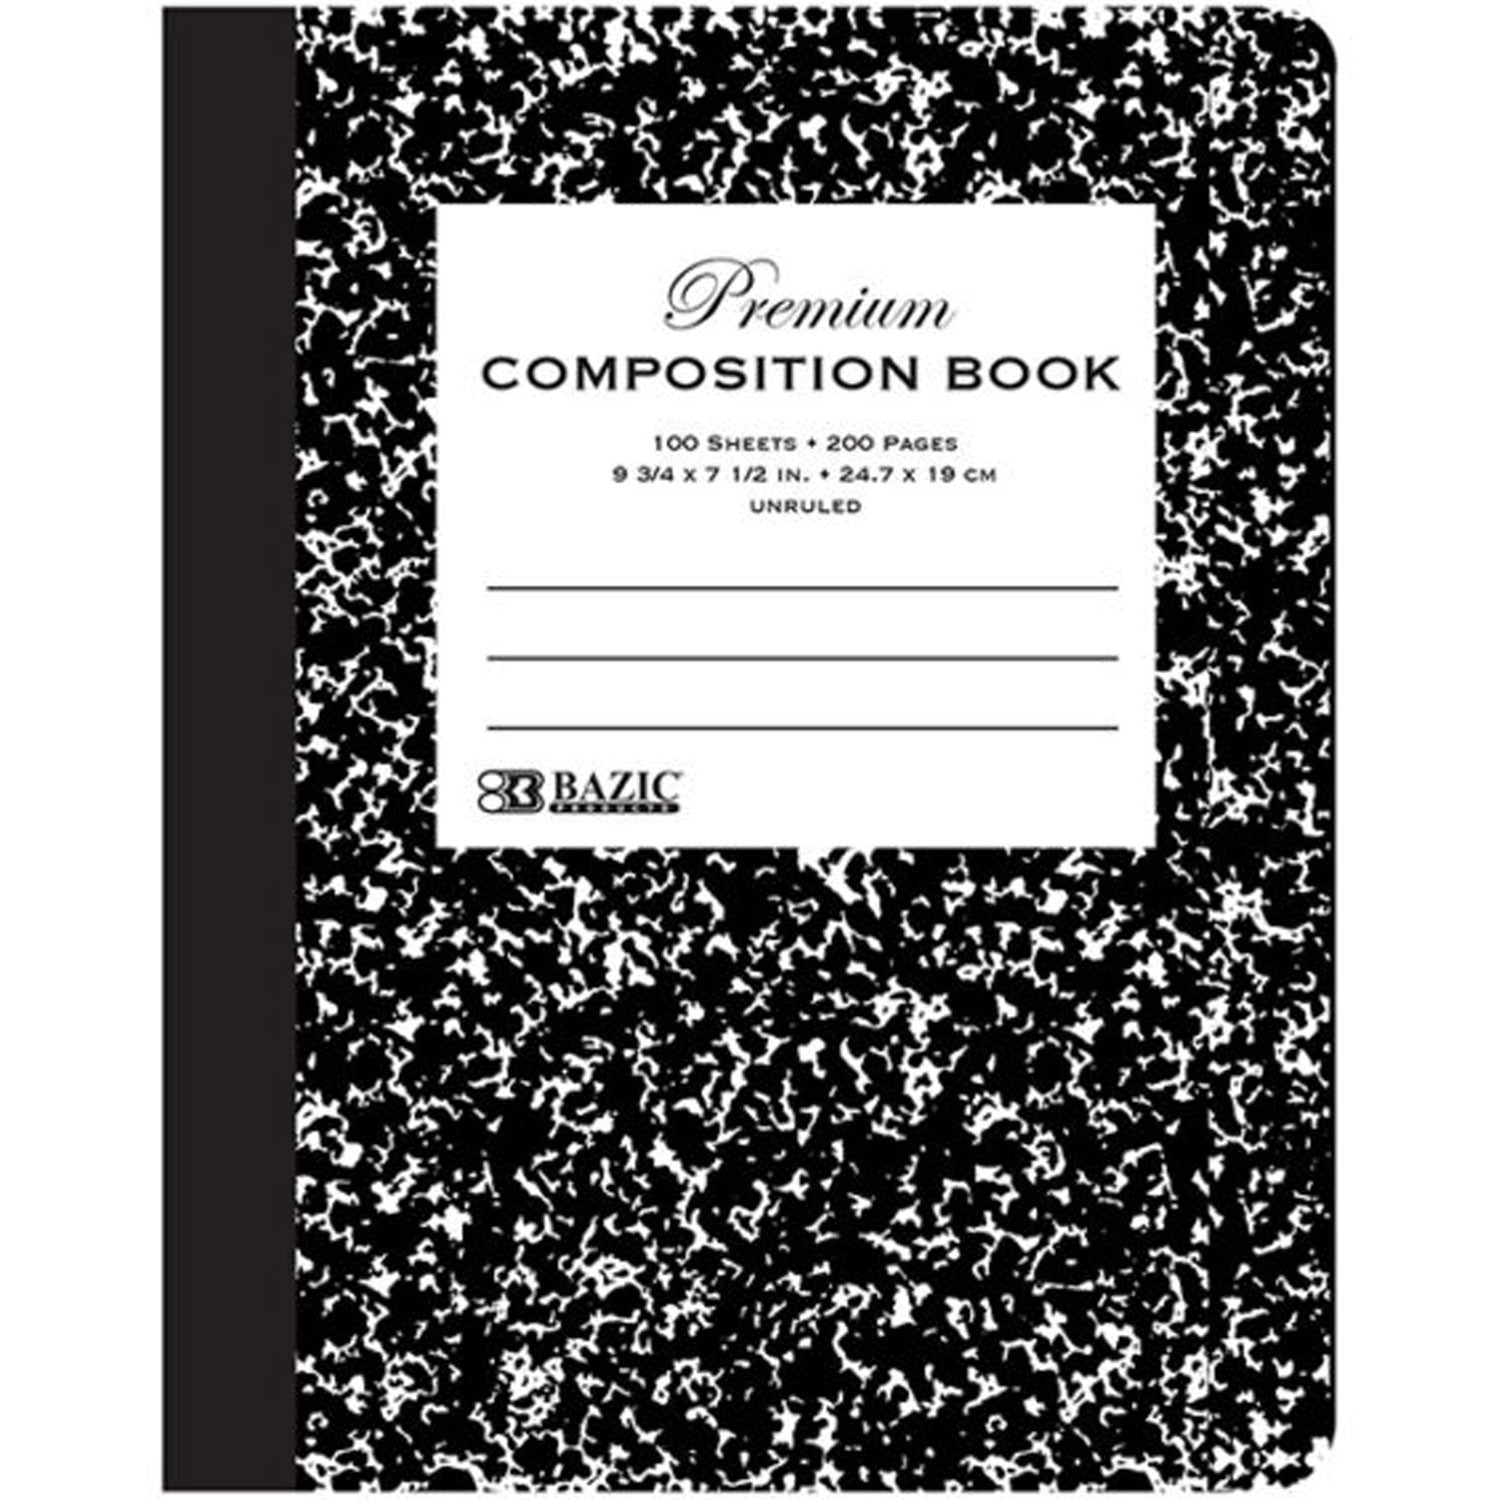 Premium Composition Book | Black Marble Cover | UNRULED 100 Ct.